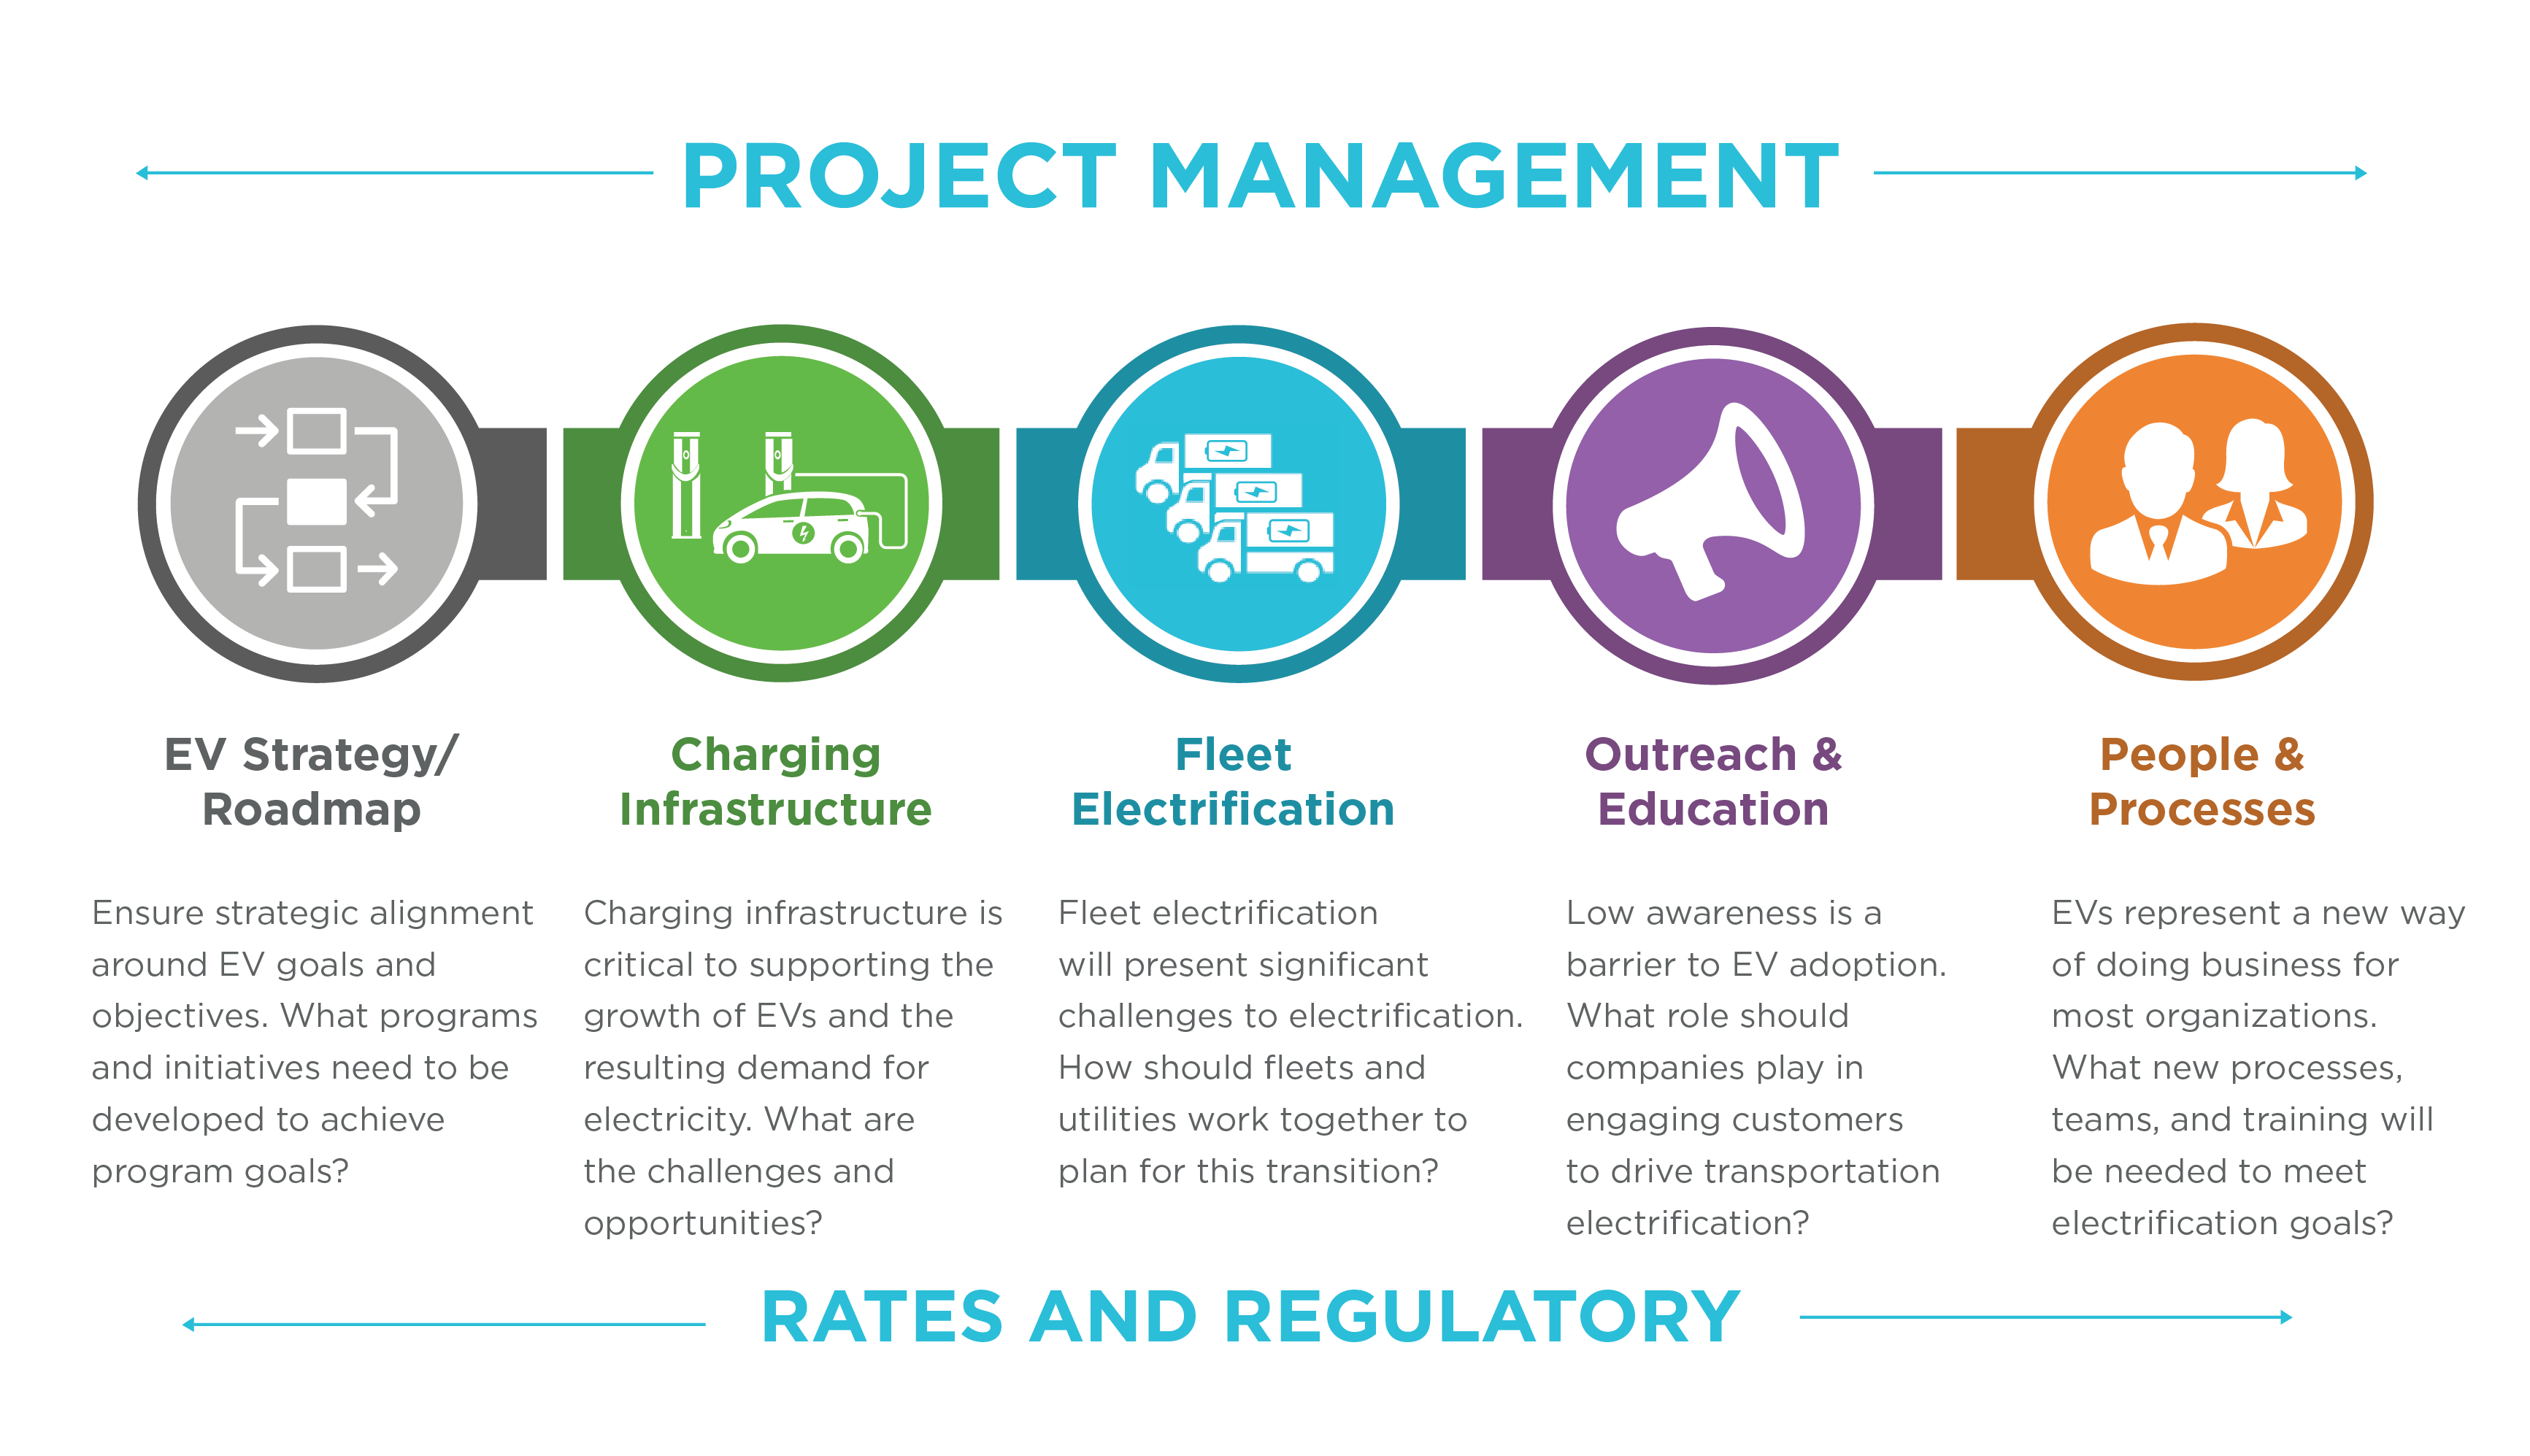 ScottMadden EV Project Management Consulting Breakdown: EV Strategy Roadmap - Charging Infrastructure - Fleet Electrification - Outreach and Education - People and Processes